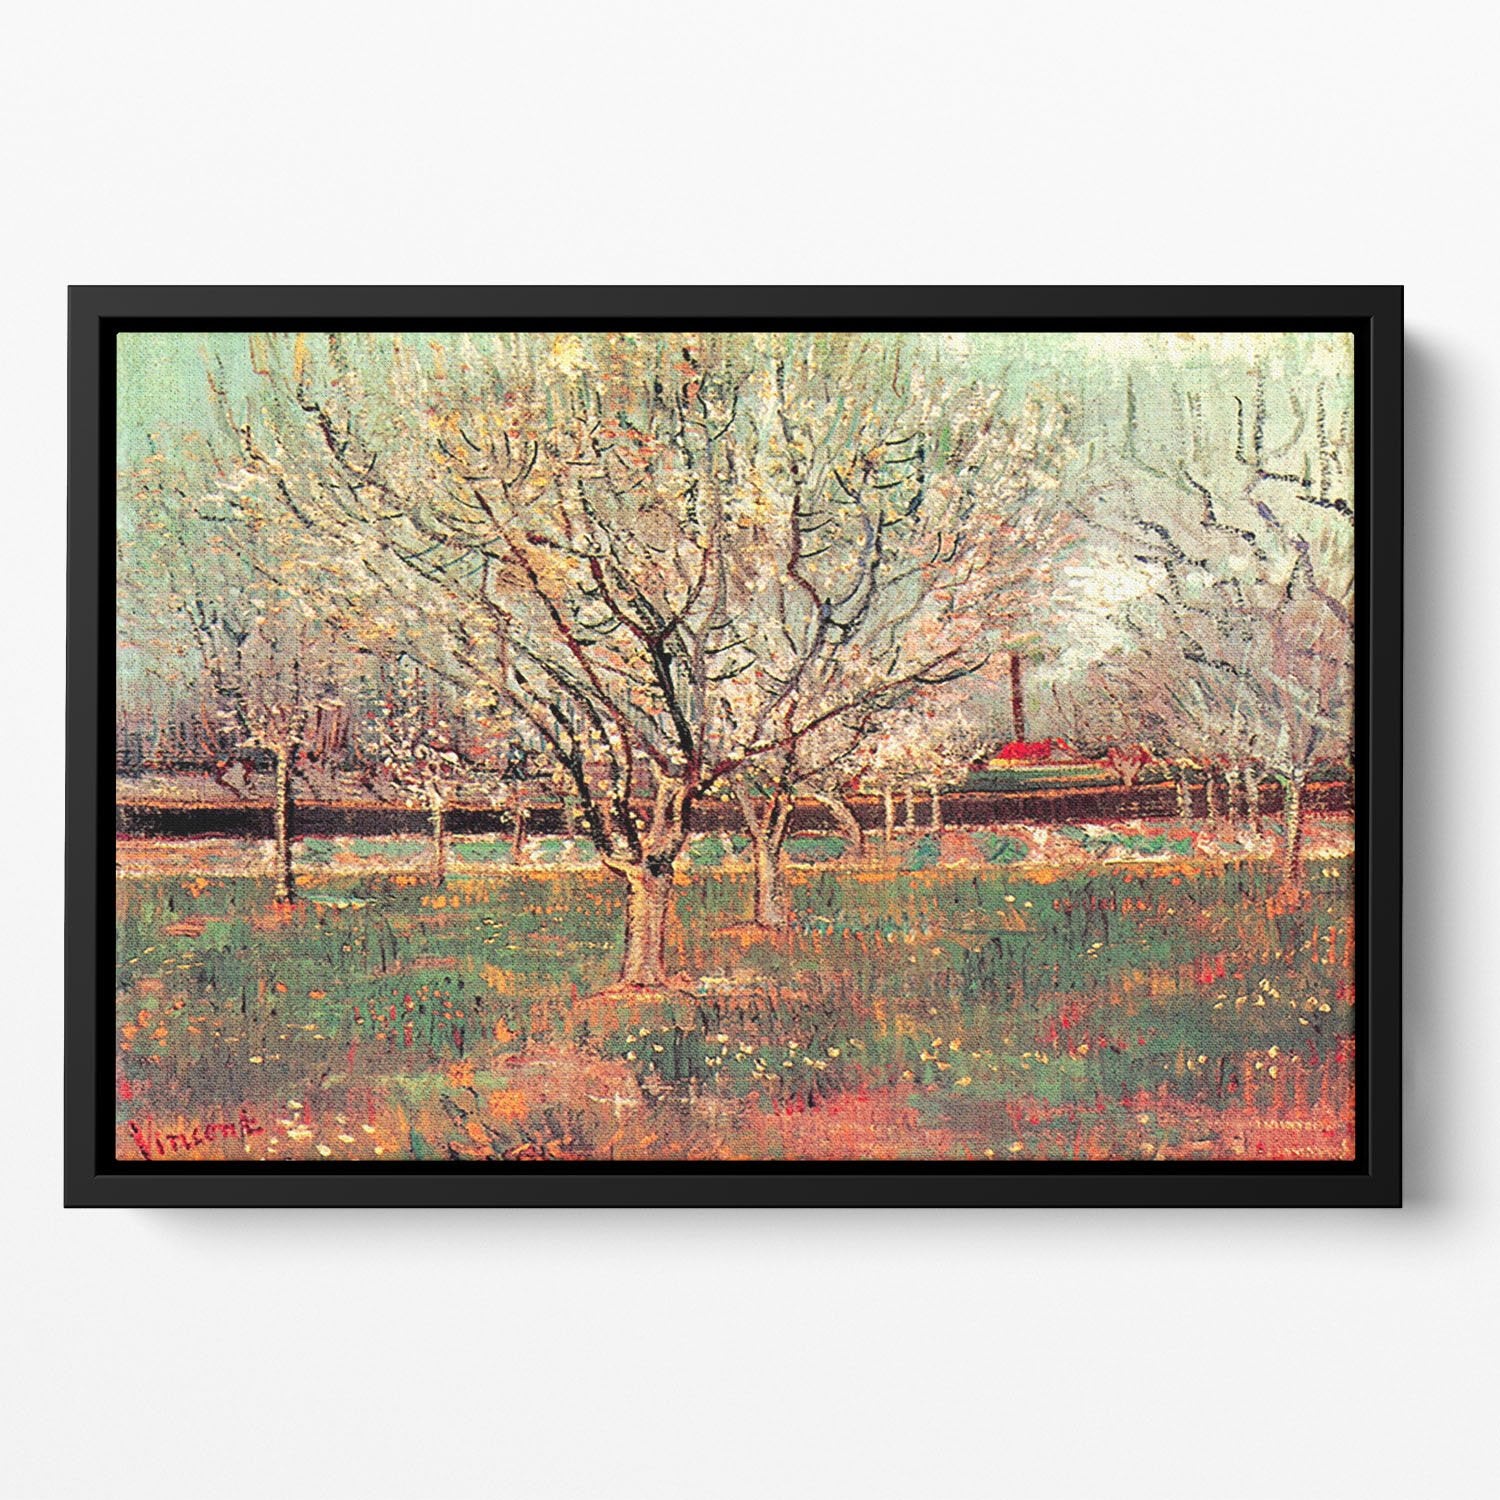 Orchard in Blossom Plum Trees by Van Gogh Floating Framed Canvas